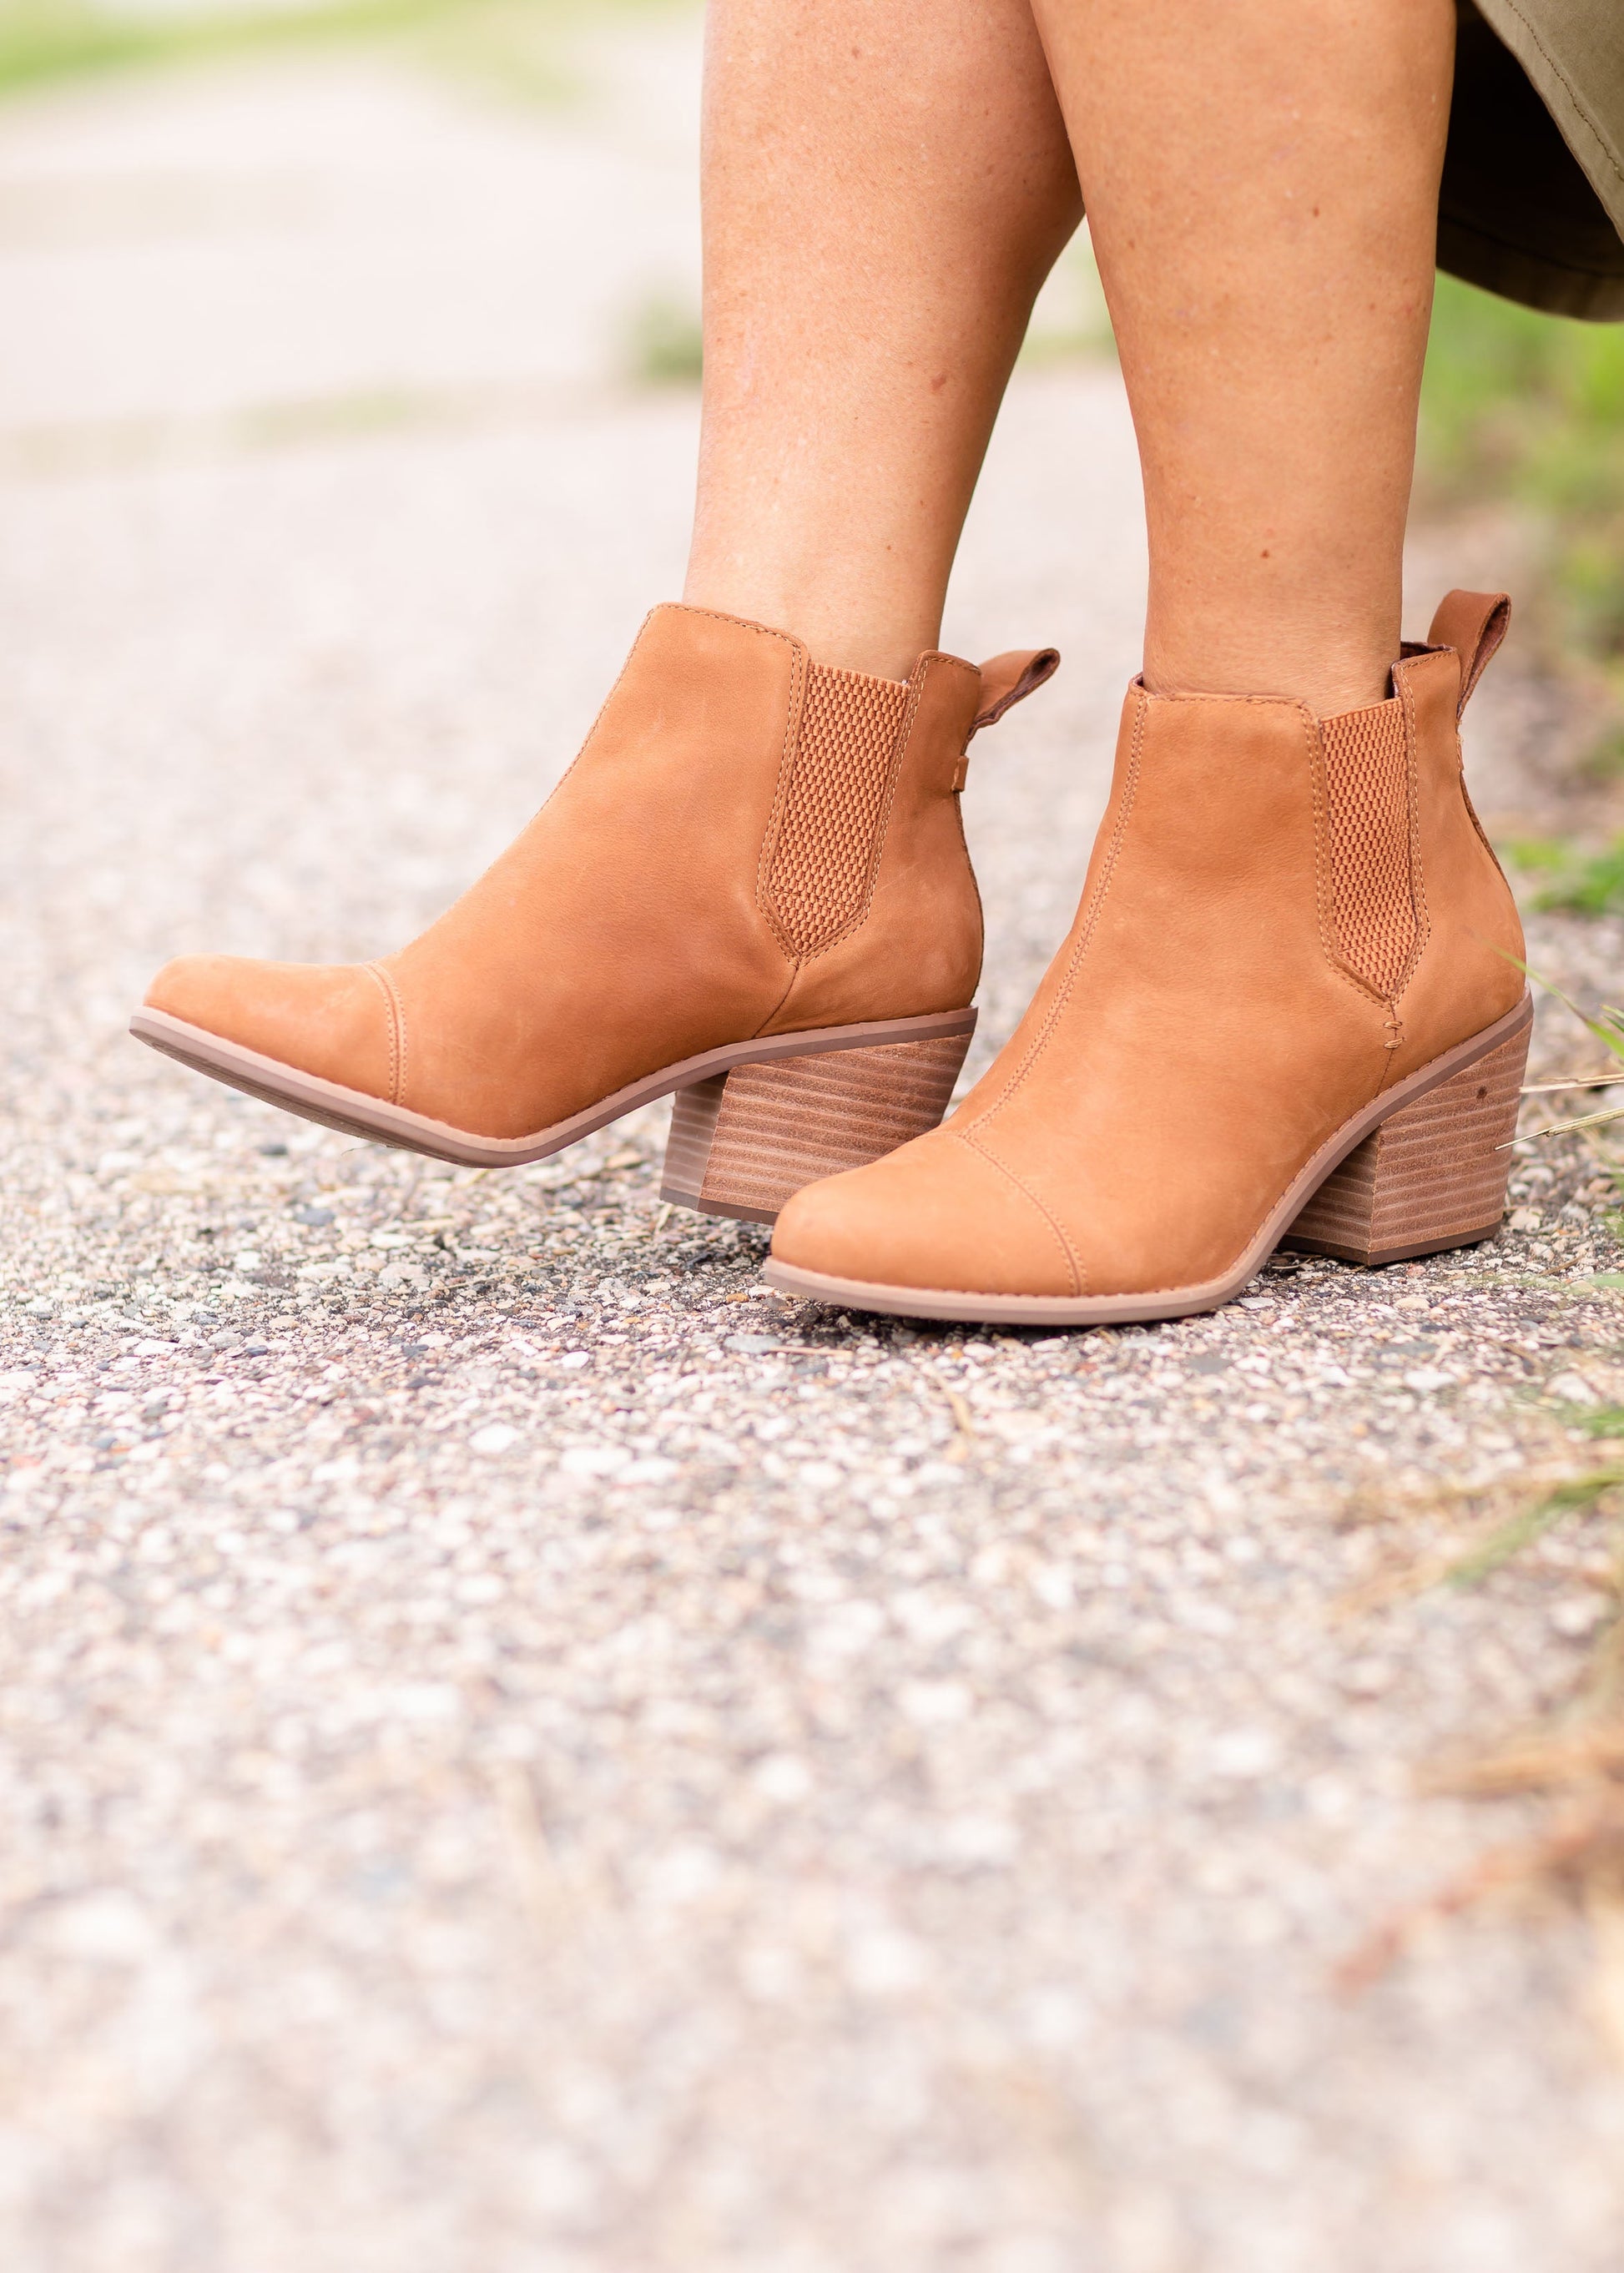 TOMS® Everly Bootie Shoes